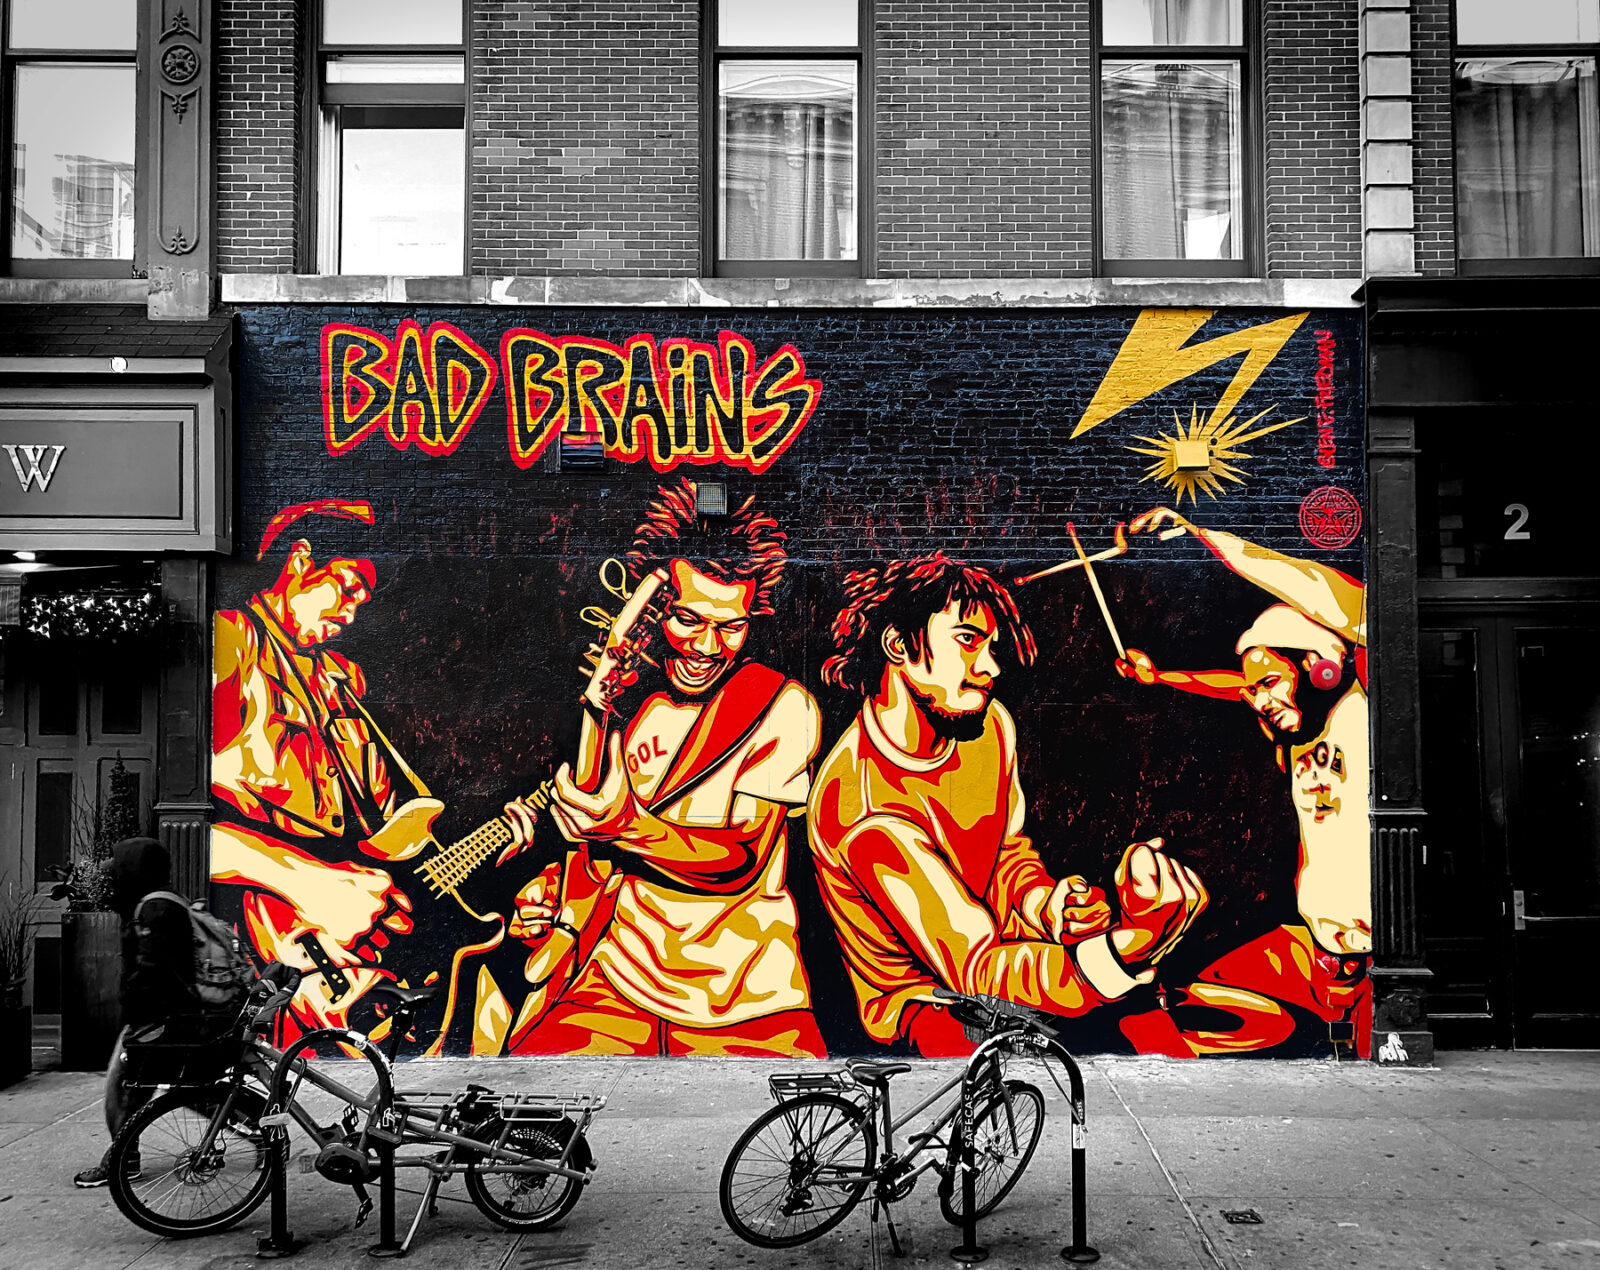 BAD BRAINS MURAL FOR LISA PROJECT NYC - Obey Giant